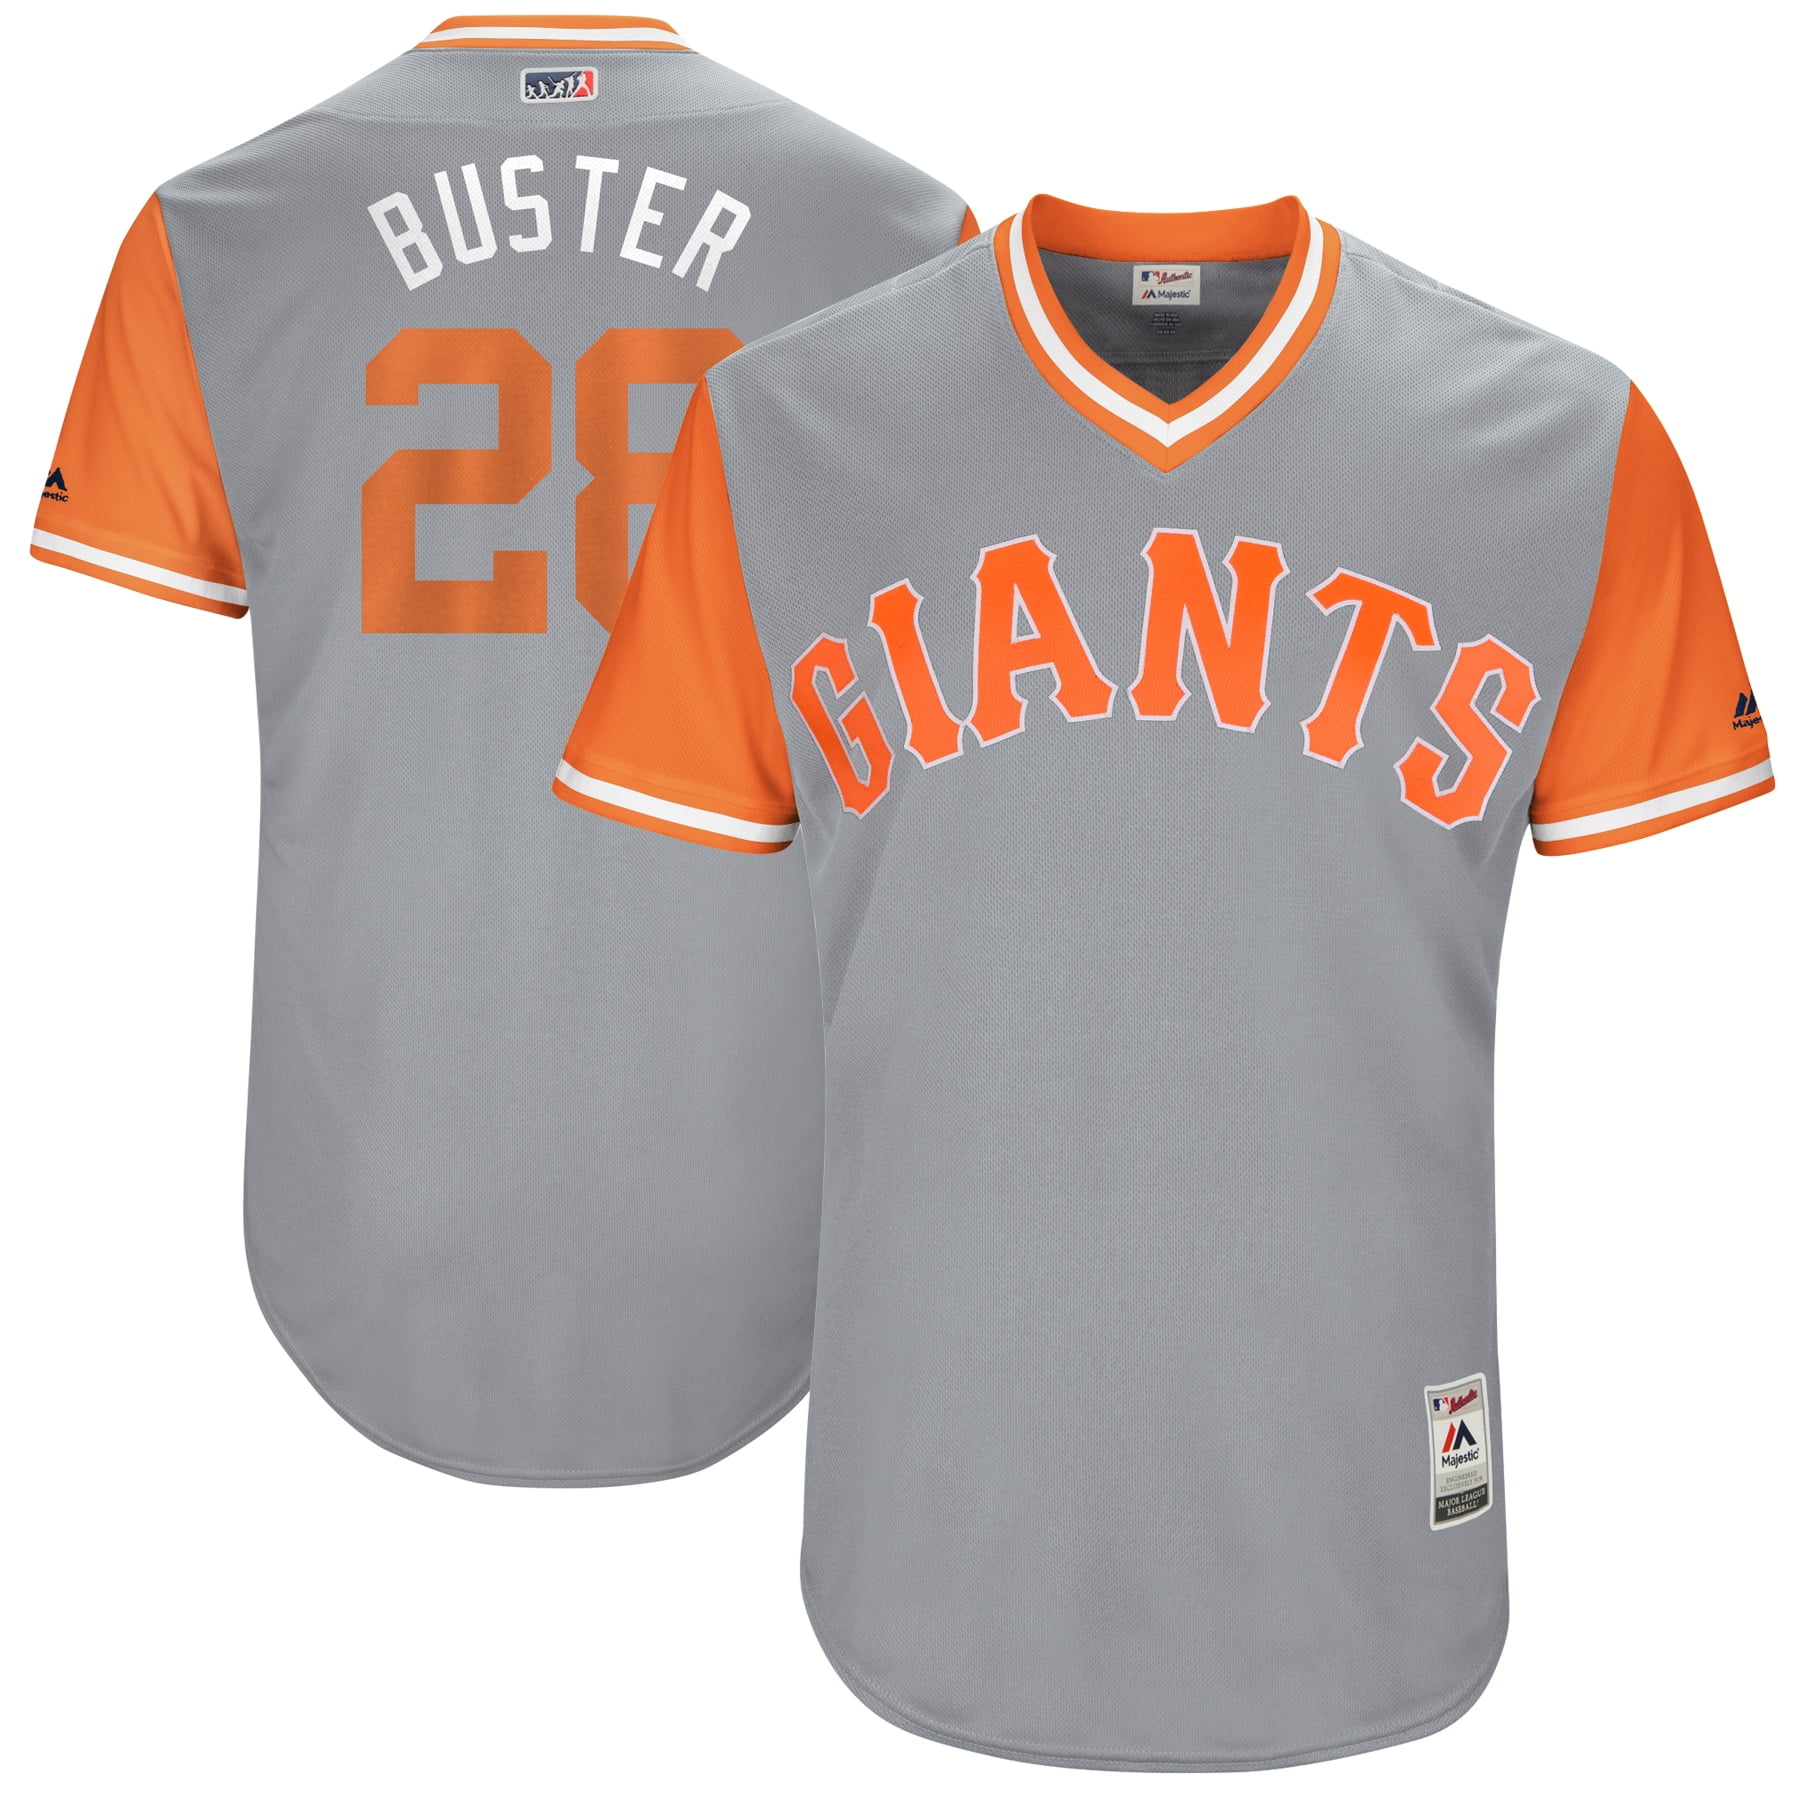 buster posey authentic jersey